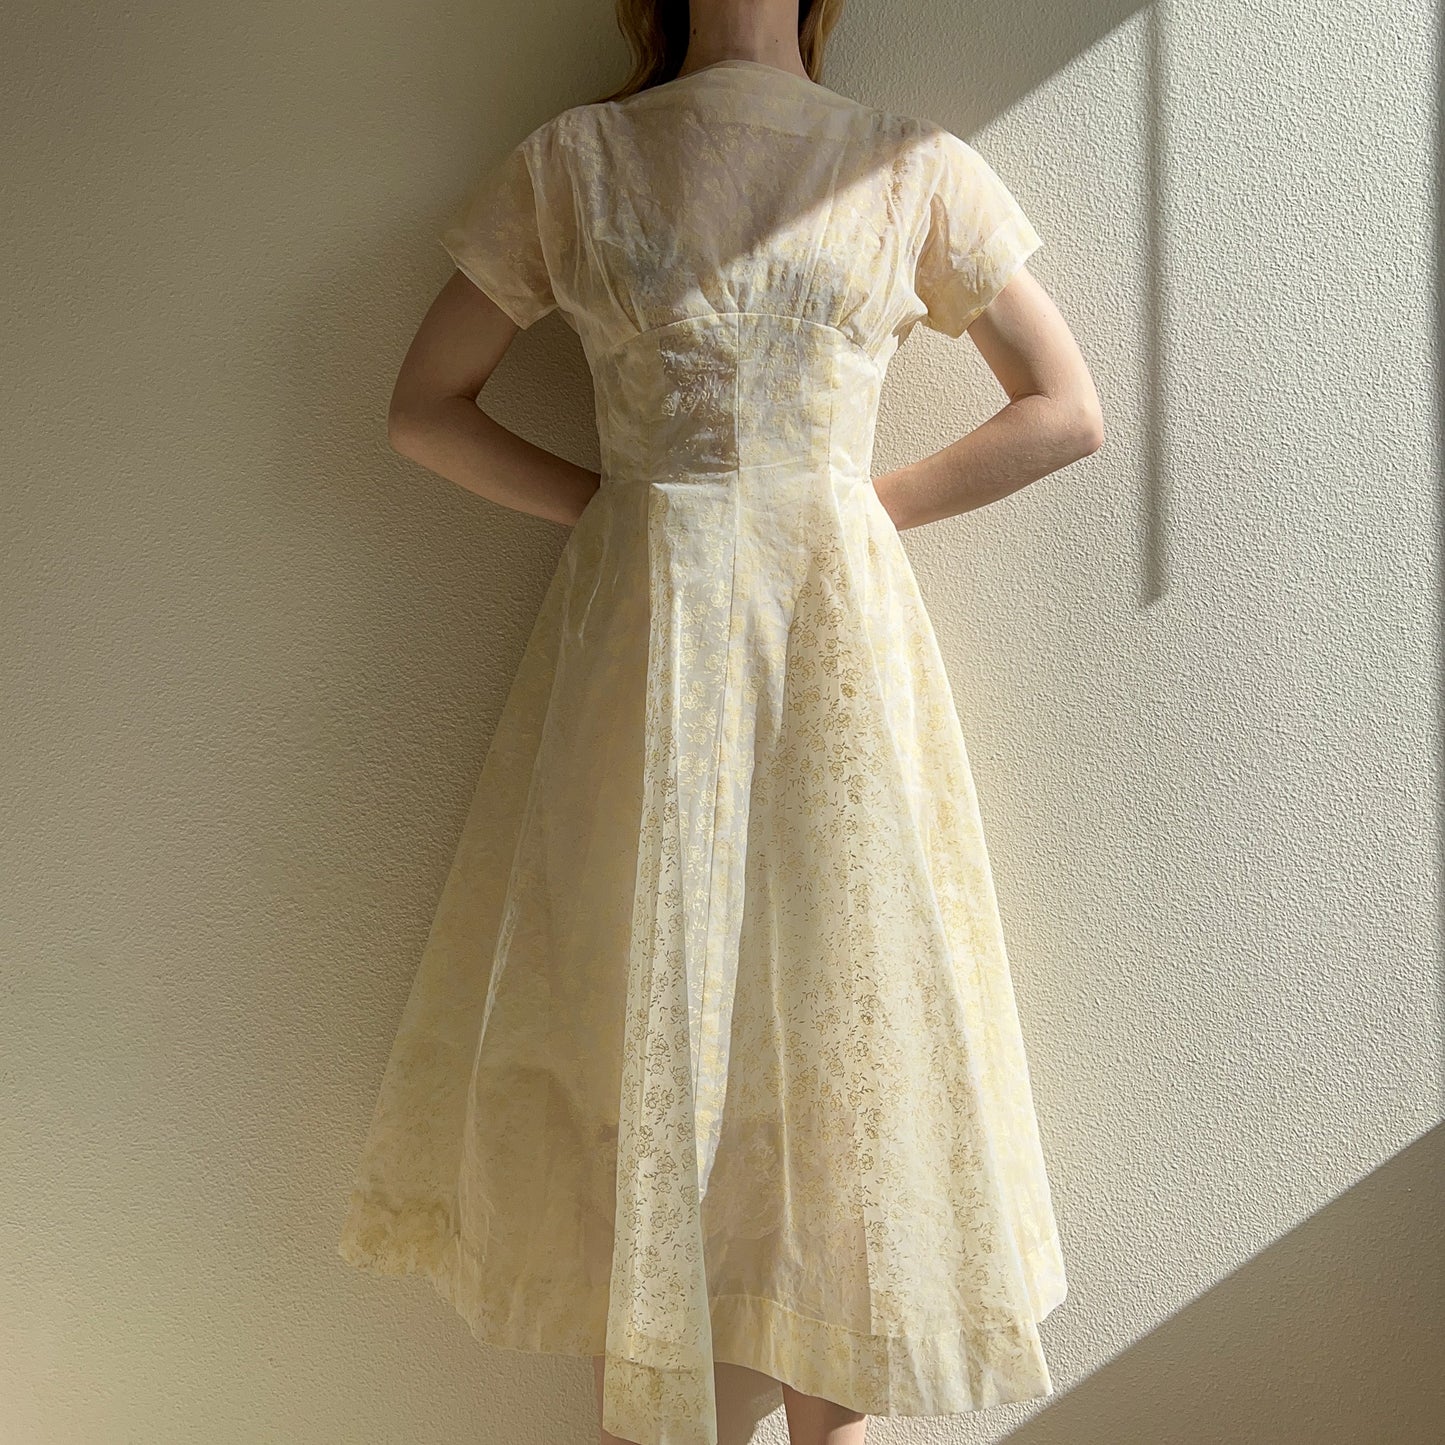 Sheer 1950s White Dainty Florals Cocktail Dress (M/L)